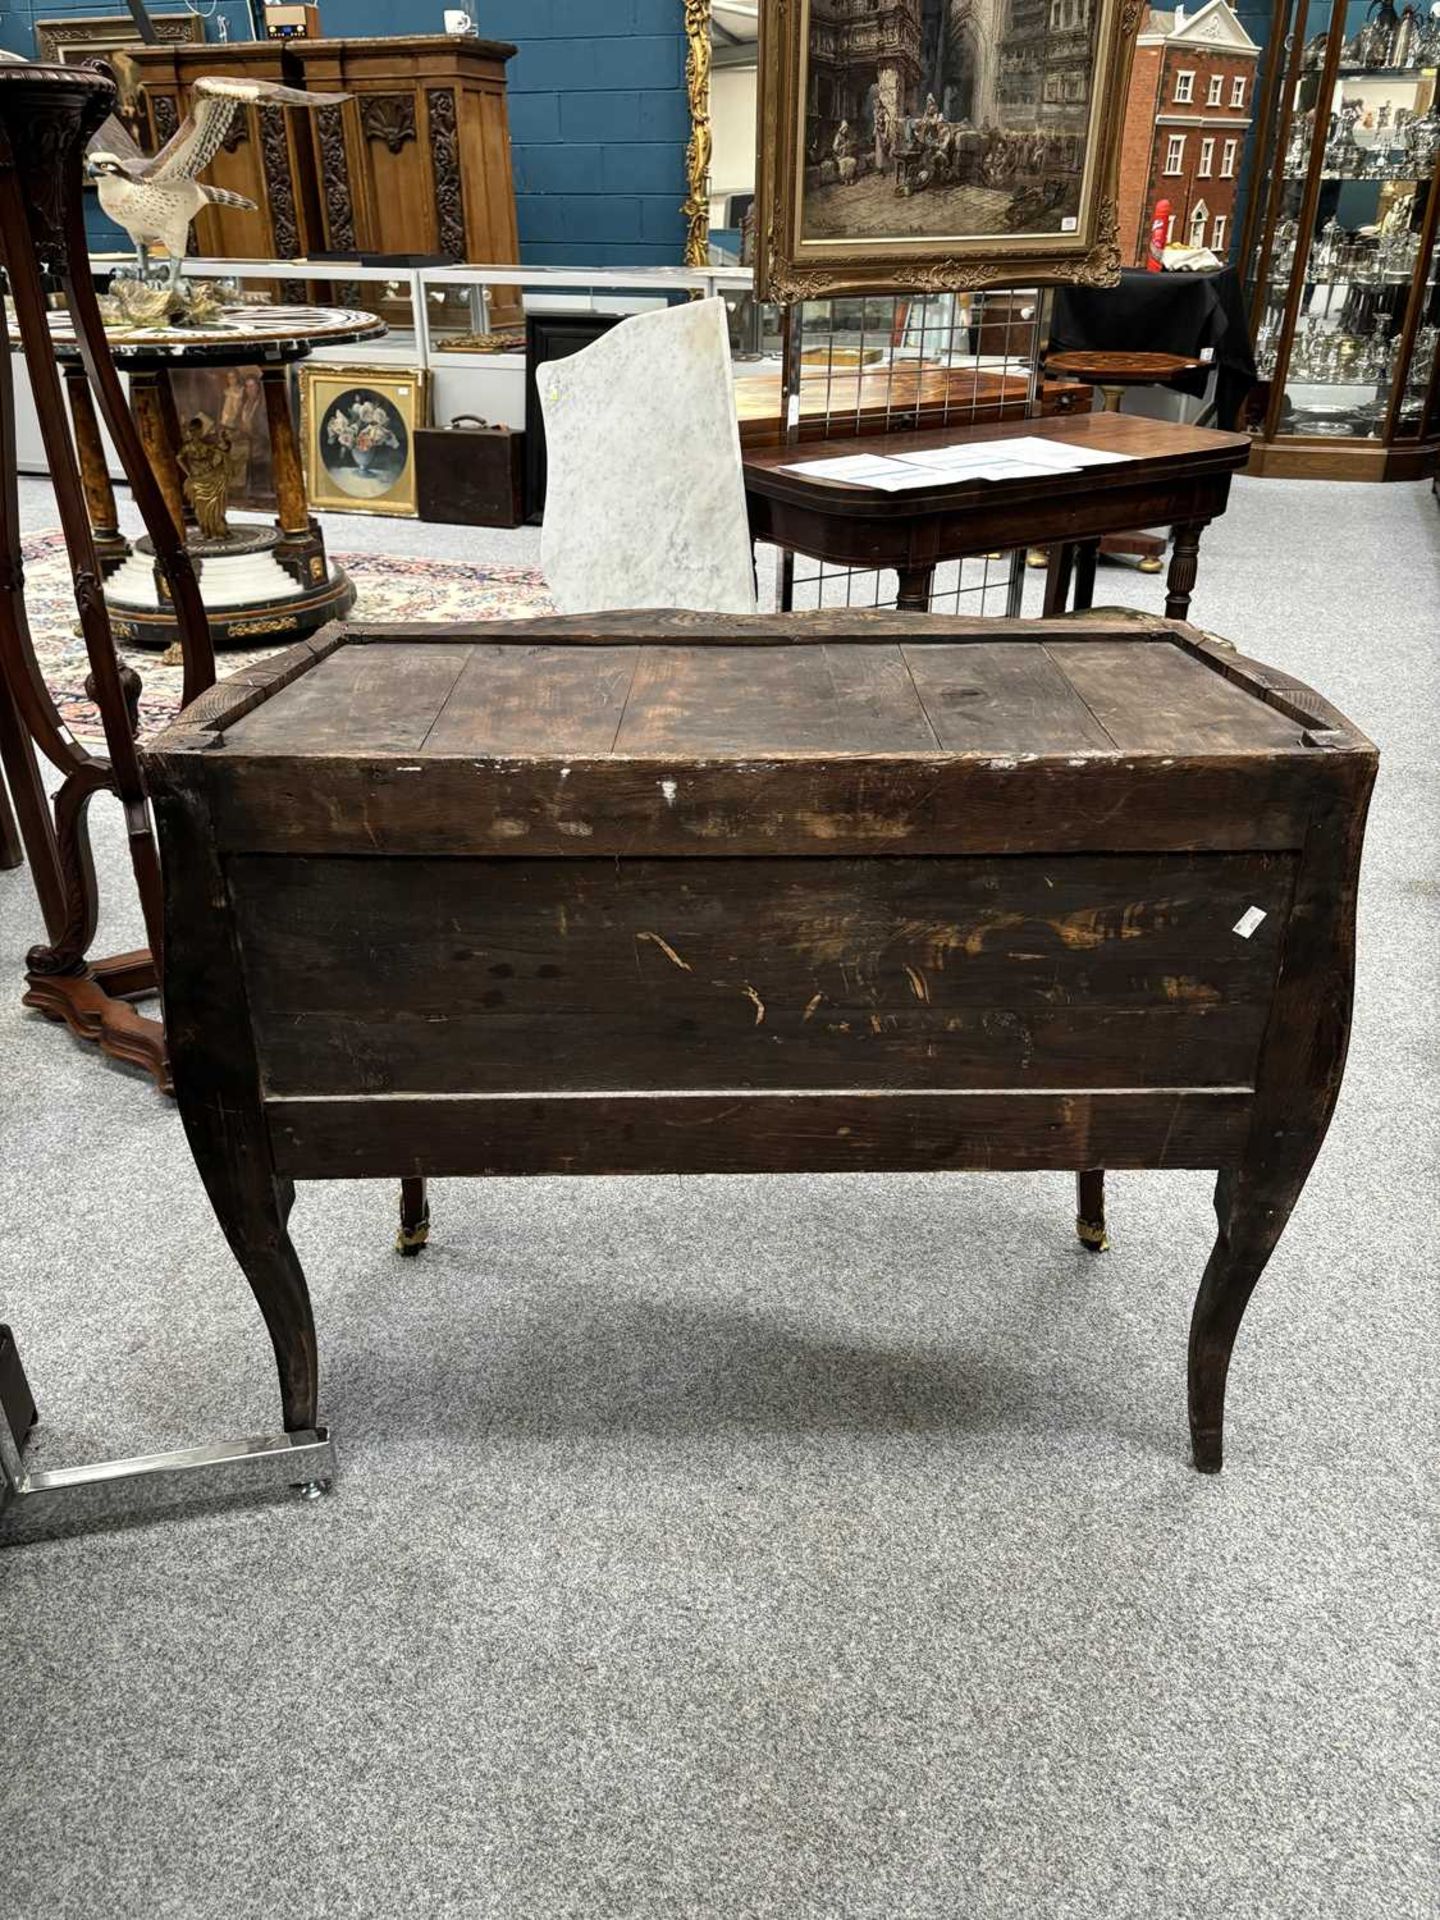 A SMALL 19TH CENTURY FRENCH INLAID KINGWOOD MARBLE-TOPPED COMMODE, STAMPED L. DROMARD, PARIS - Image 8 of 15